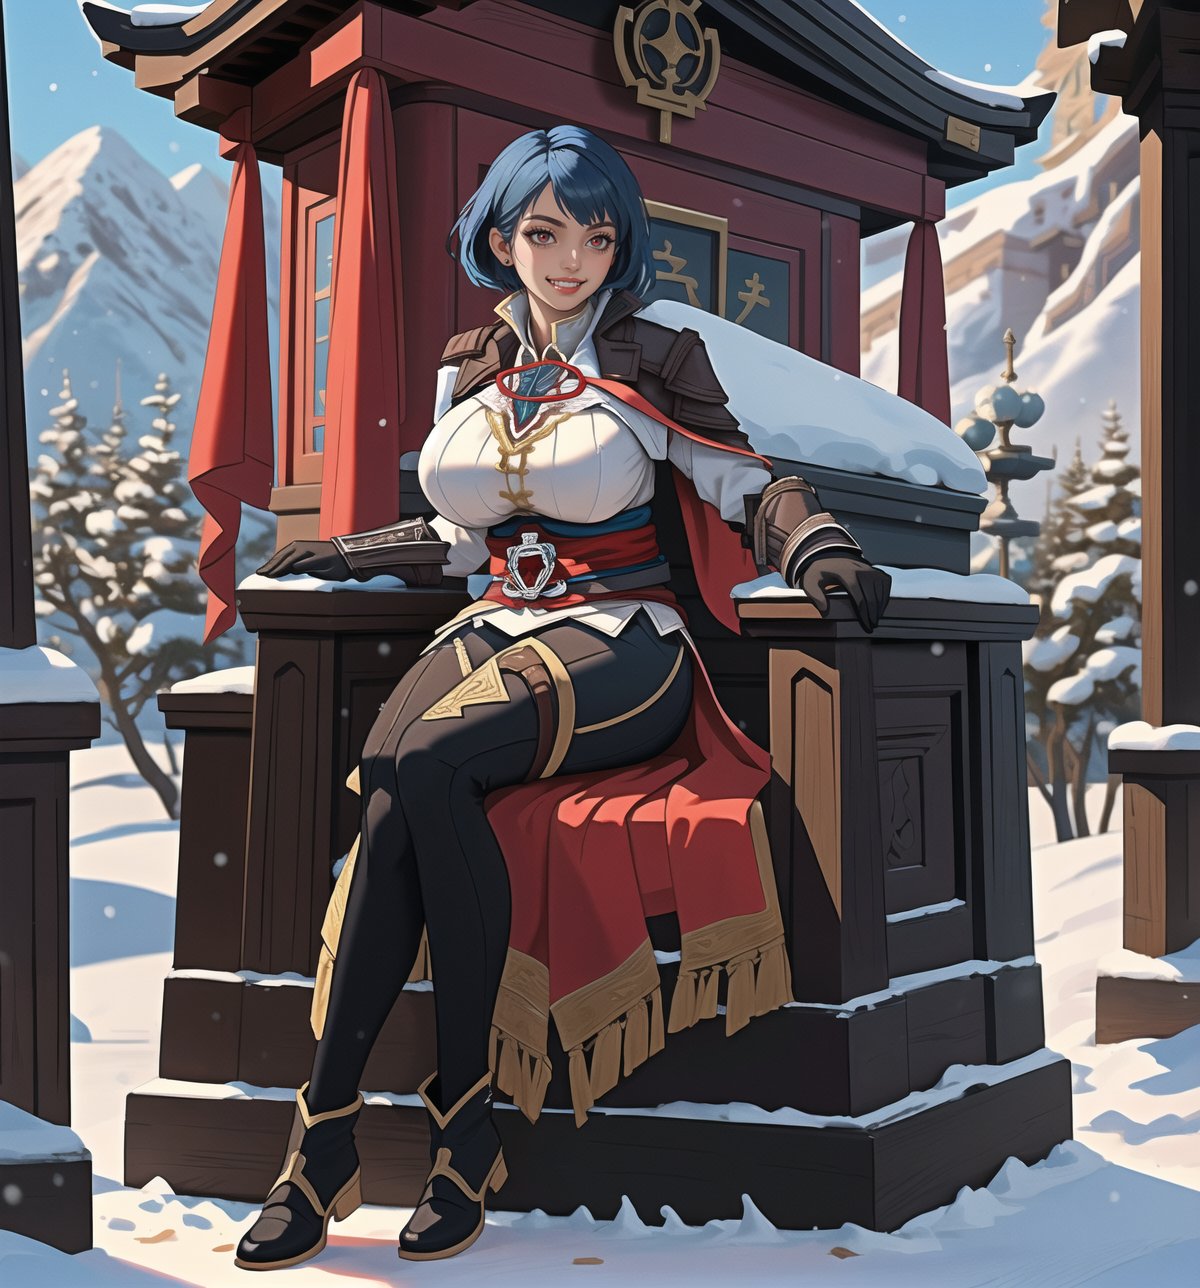 An ultra-detailed 16K masterpiece in the styles of ((Assassin's Creed)), fantasy and adventure, rendered in ultra-high resolution with realistic detail. Fammy, a beautiful 23-year-old woman, is dressed as an assassin in an ancient temple in the snowy mountains. She wears a black cape, a white tunic, a black belt, black boots and black gloves. Her short ((blue hair)) is styled in a Mohican cut with gradient effects. She has red eyes, looking at the viewer while ((smiling, showing her teeth)) and wearing red lipstick. The image emphasises Fammy's imposing figure and the architectural elements of the ancient temple. The rocky, wooden and carved structures, together with the statuettes and the backdrop of snowy mountains, create a mysterious and tense atmosphere. The melted wax candles, stone sarcophagus and bones scattered on the floor add macabre detail to the scene. Soft, sombre lighting effects create a relaxing, mysterious atmosphere, while detailed textures on the structures and costume add realism to the image. | A tense and mysterious scene of a beautiful assassin in an ancient temple in the snowy mountains, fusing elements of Assassin's Creed, fantasy and adventure. (((The image reveals a full-body shot as Fammy assumes a sensual pose, engagingly leaning against a structure within the scene in an exciting manner. She takes on a sensual pose as she interacts, boldly leaning on a structure, leaning back and boldly throwing herself onto the structure, reclining back in an exhilarating way.))). | ((((full-body shot)))), ((perfect pose)), ((perfect limbs, perfect fingers, better hands, perfect hands, hands)), ((perfect legs, perfect feet)), ((huge breasts)), ((perfect design)), ((perfect composition)), ((very detailed scene, very detailed background, perfect layout, correct imperfections)), Enhance, Ultra details++, More Detail, poakl